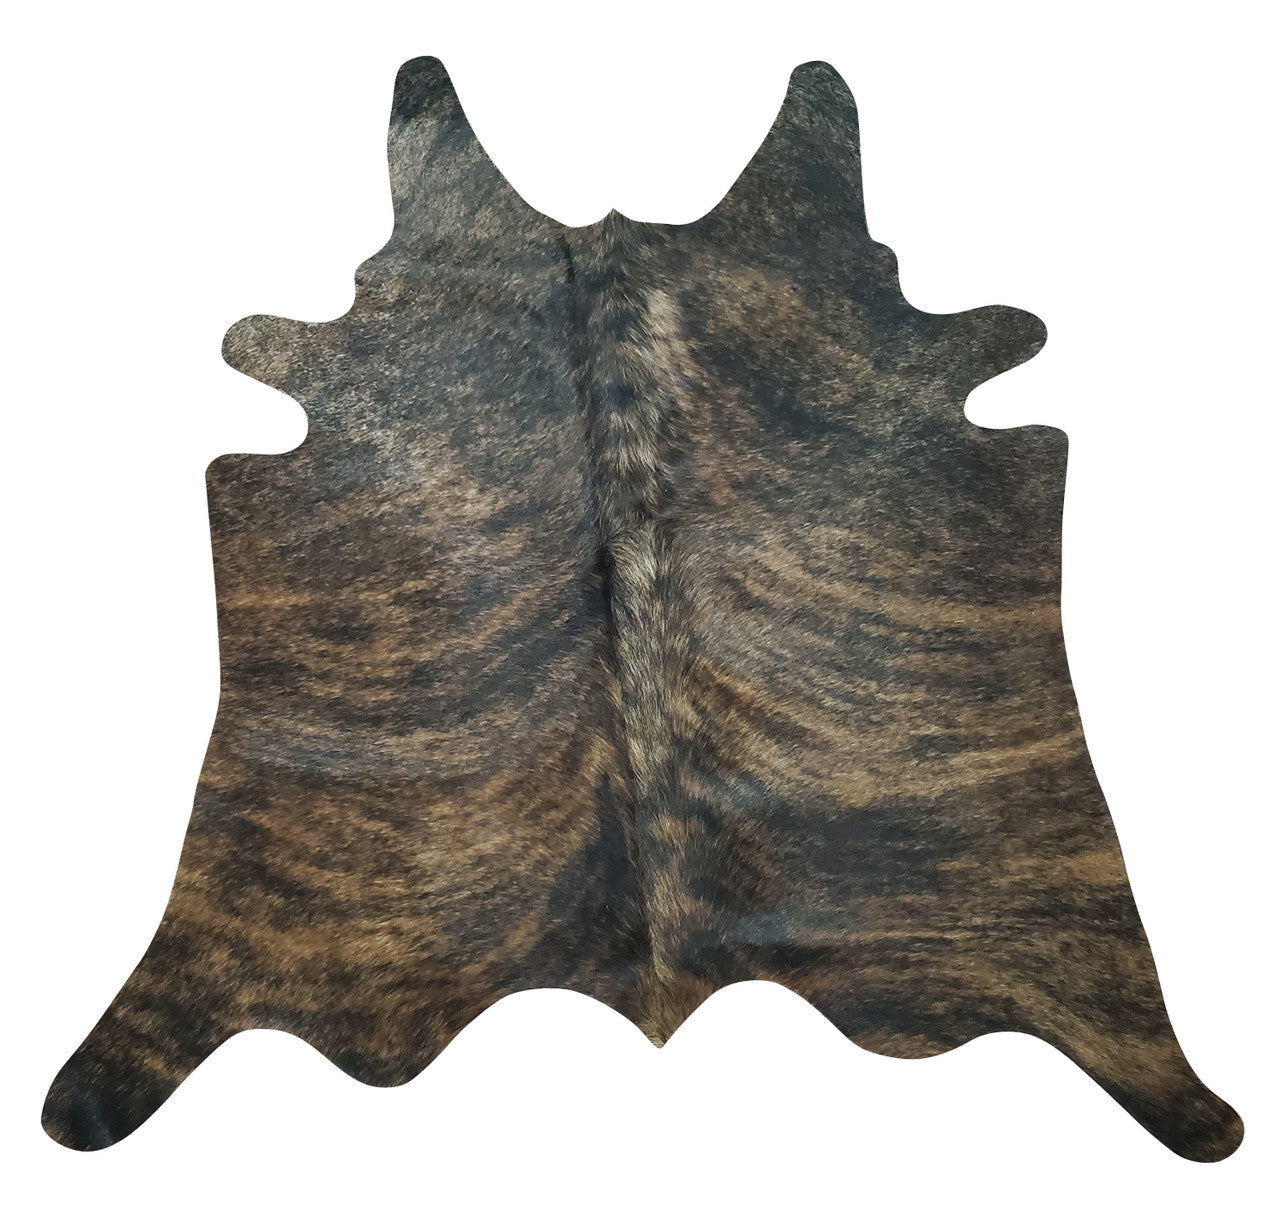 This mini cowhide rug so soft and thick! everyone loves walking on it. The colors are great.